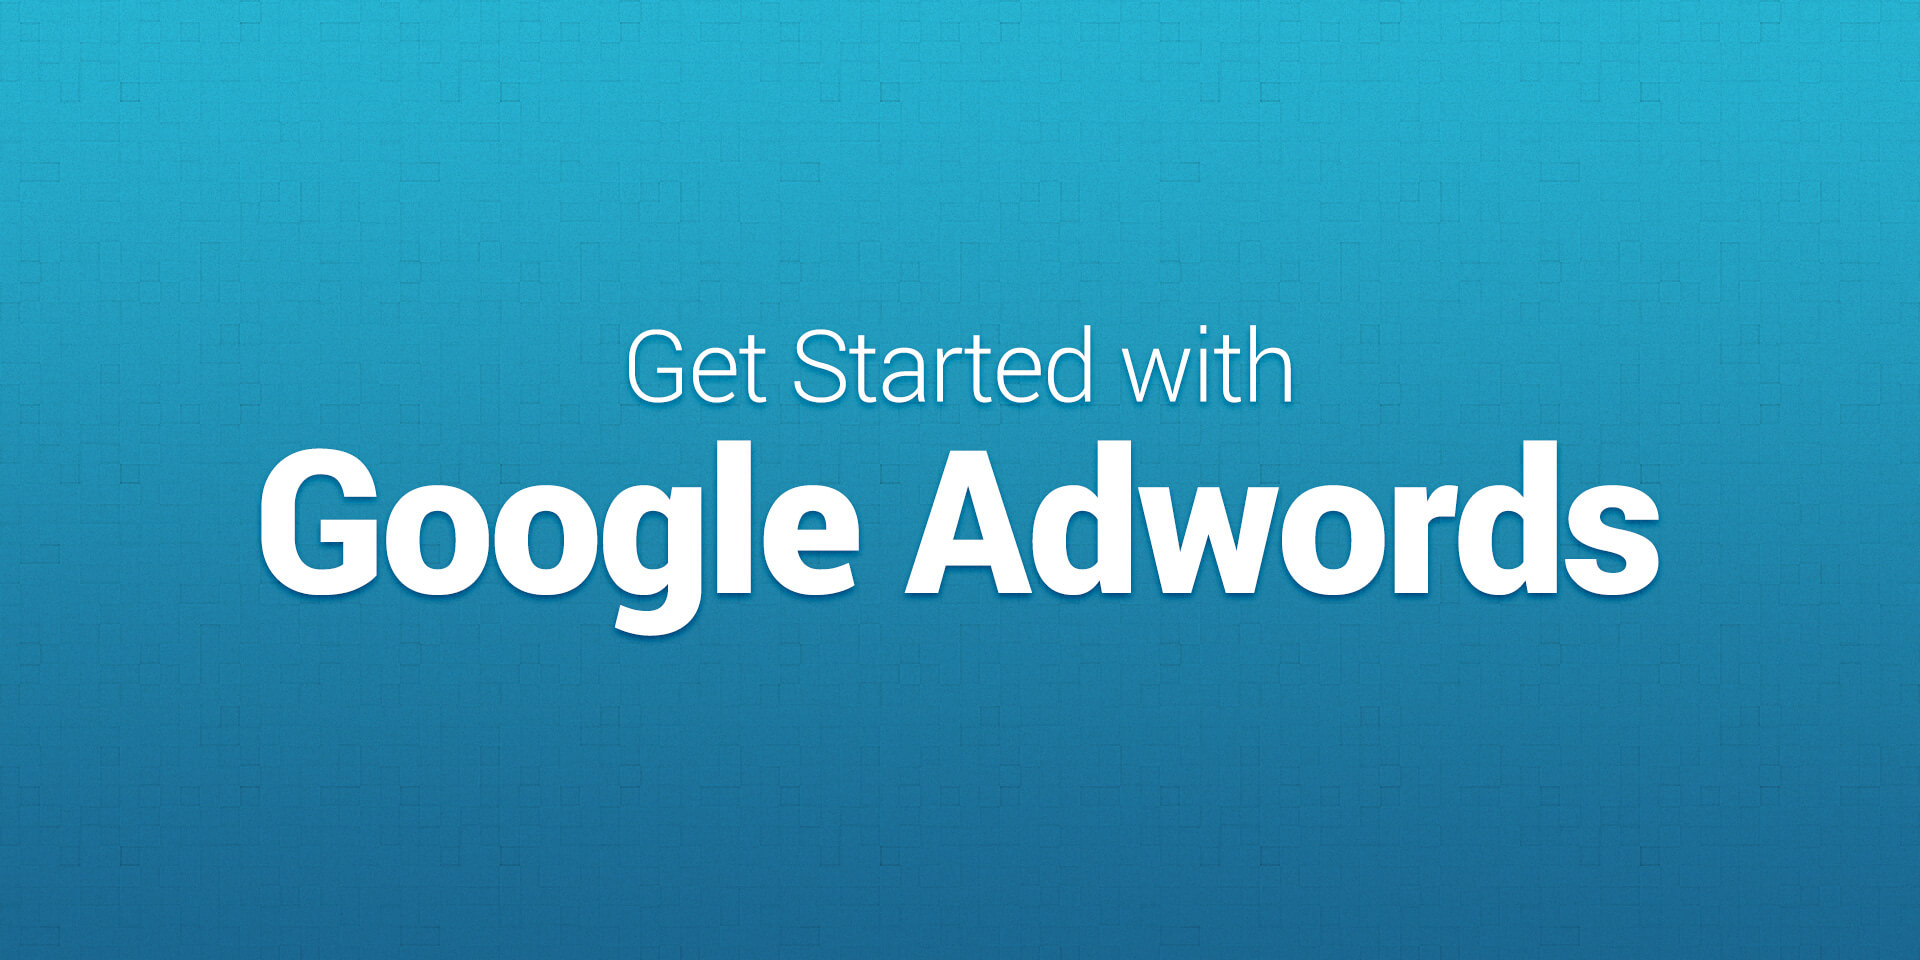 Getting started with Google Adwords